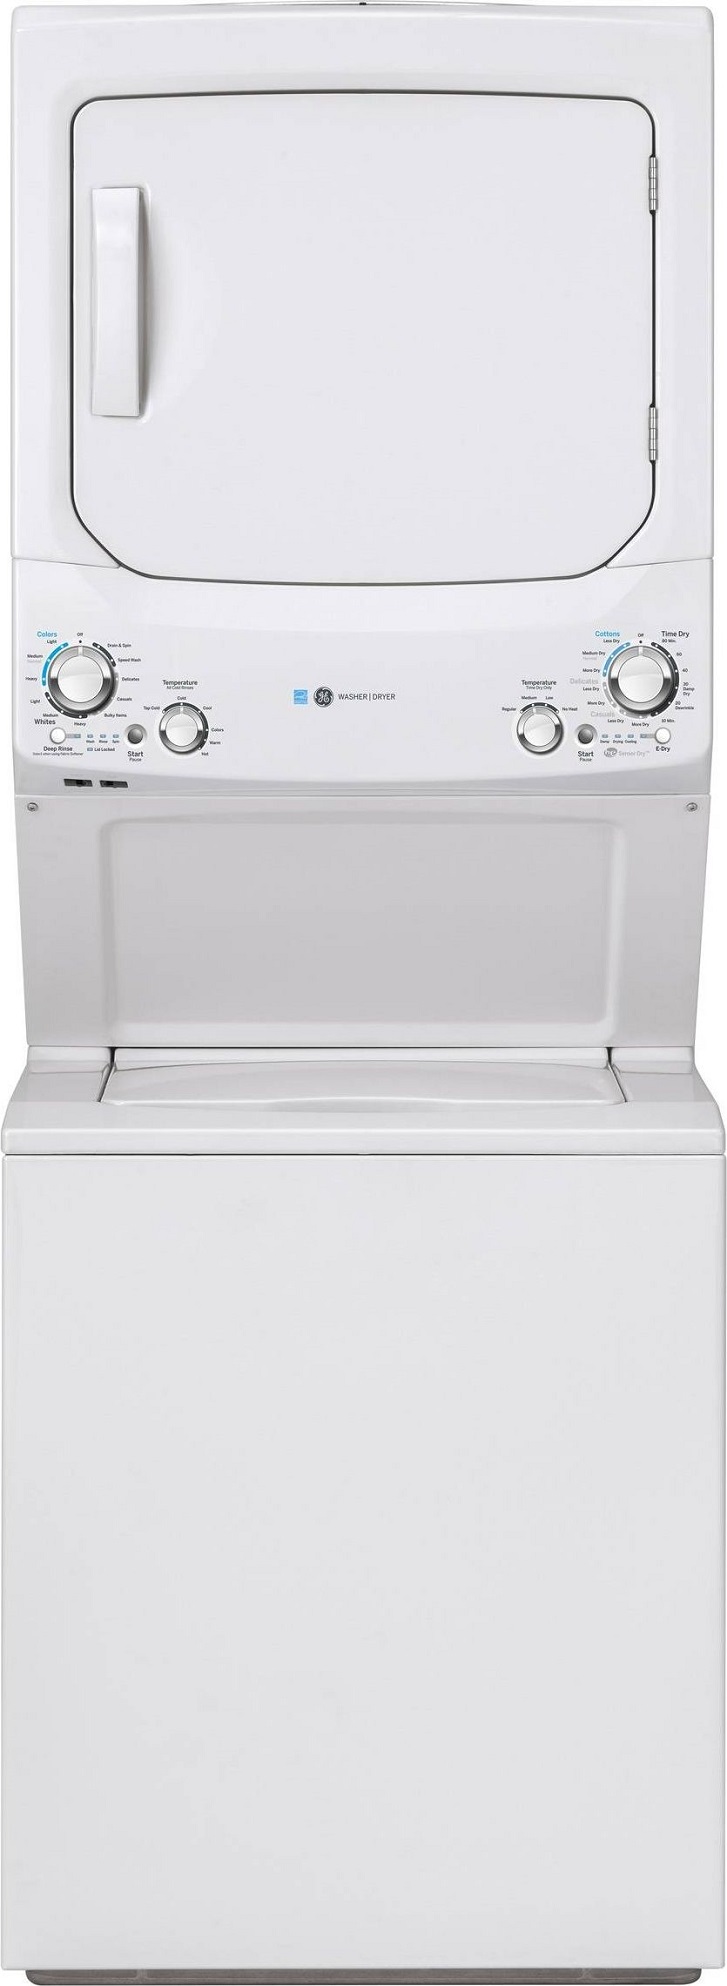 GE APPLIANCES GUD27GESNWW  COMBINATION WASHER GAS DRYER White - image 1 of 5